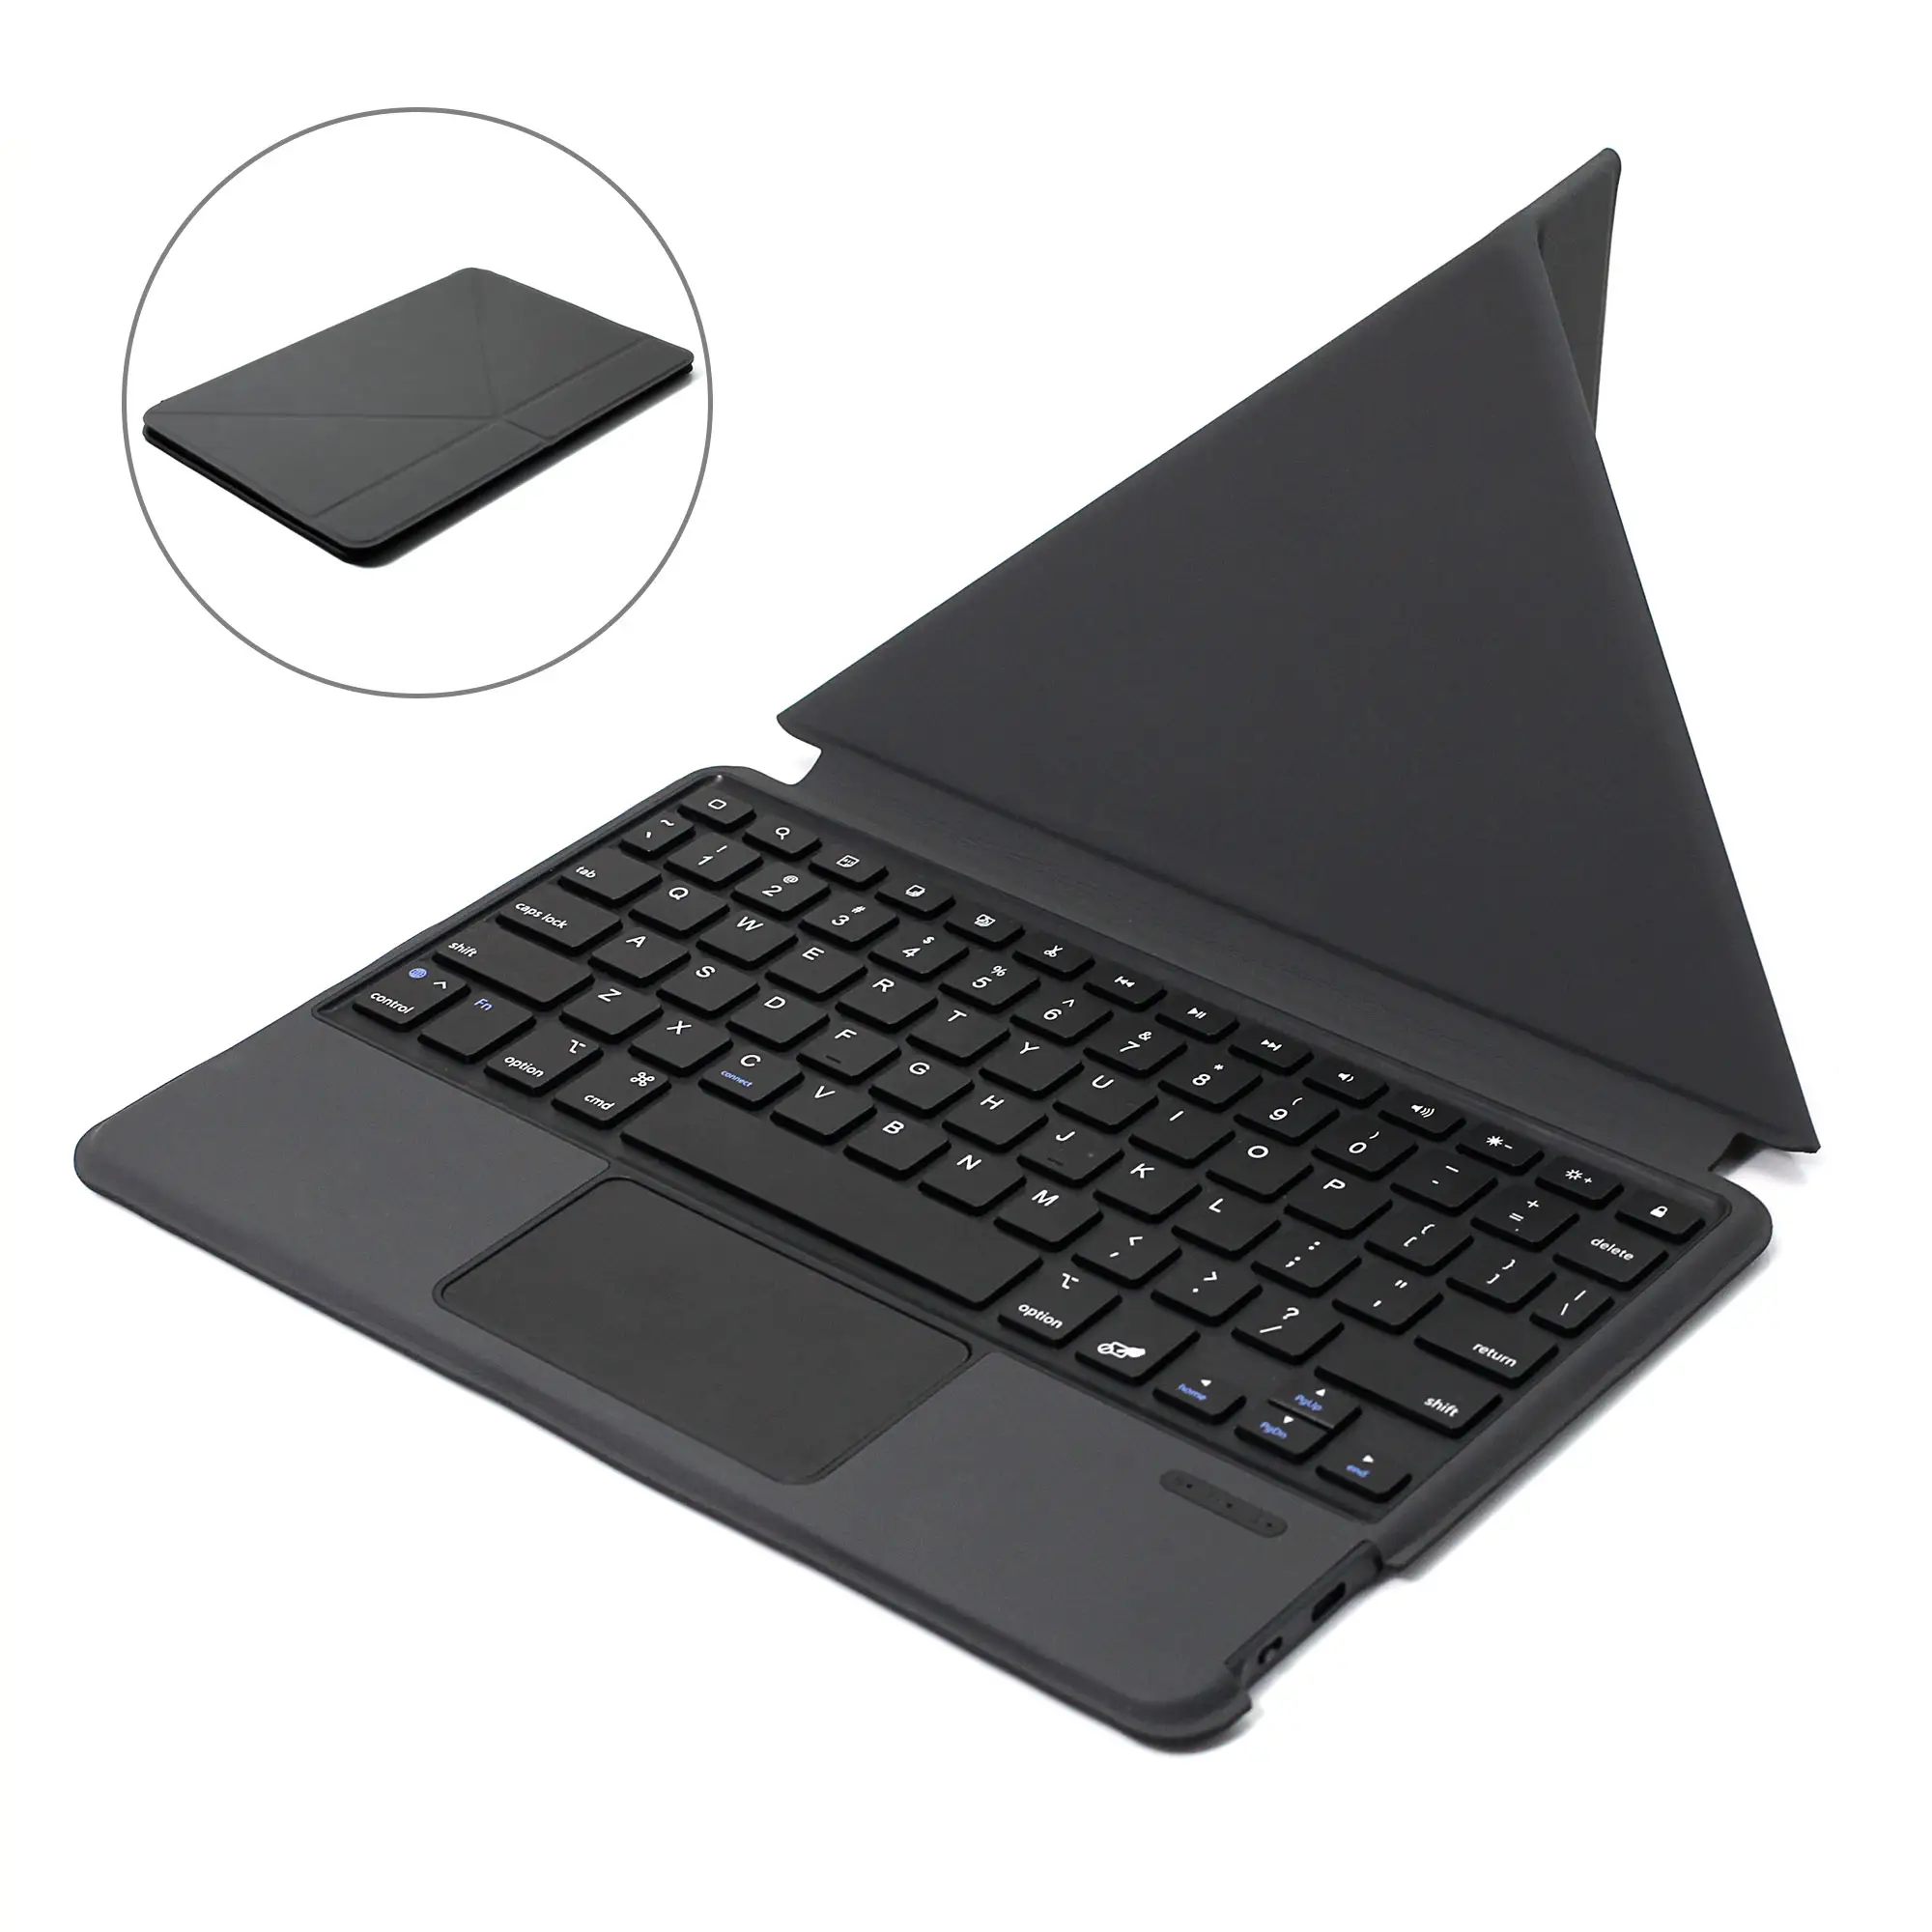 New Origami Universal Detachable Case Compatible Tablets Phones Wireless Keyboard Cover Case For iPad Samsung Huawei Tablet